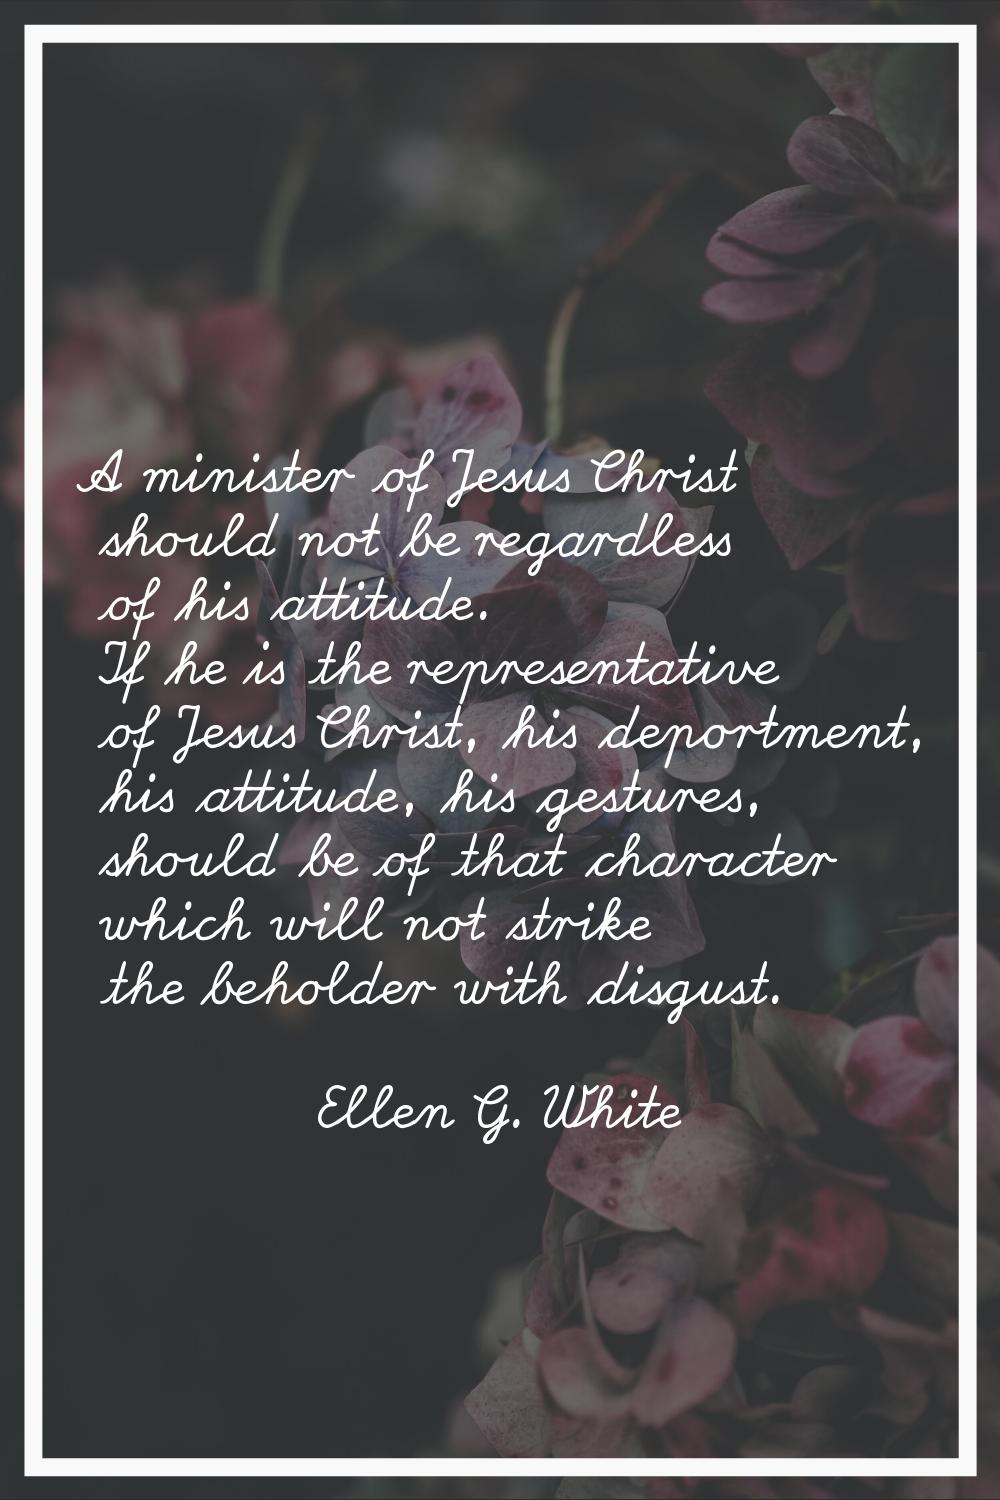 A minister of Jesus Christ should not be regardless of his attitude. If he is the representative of